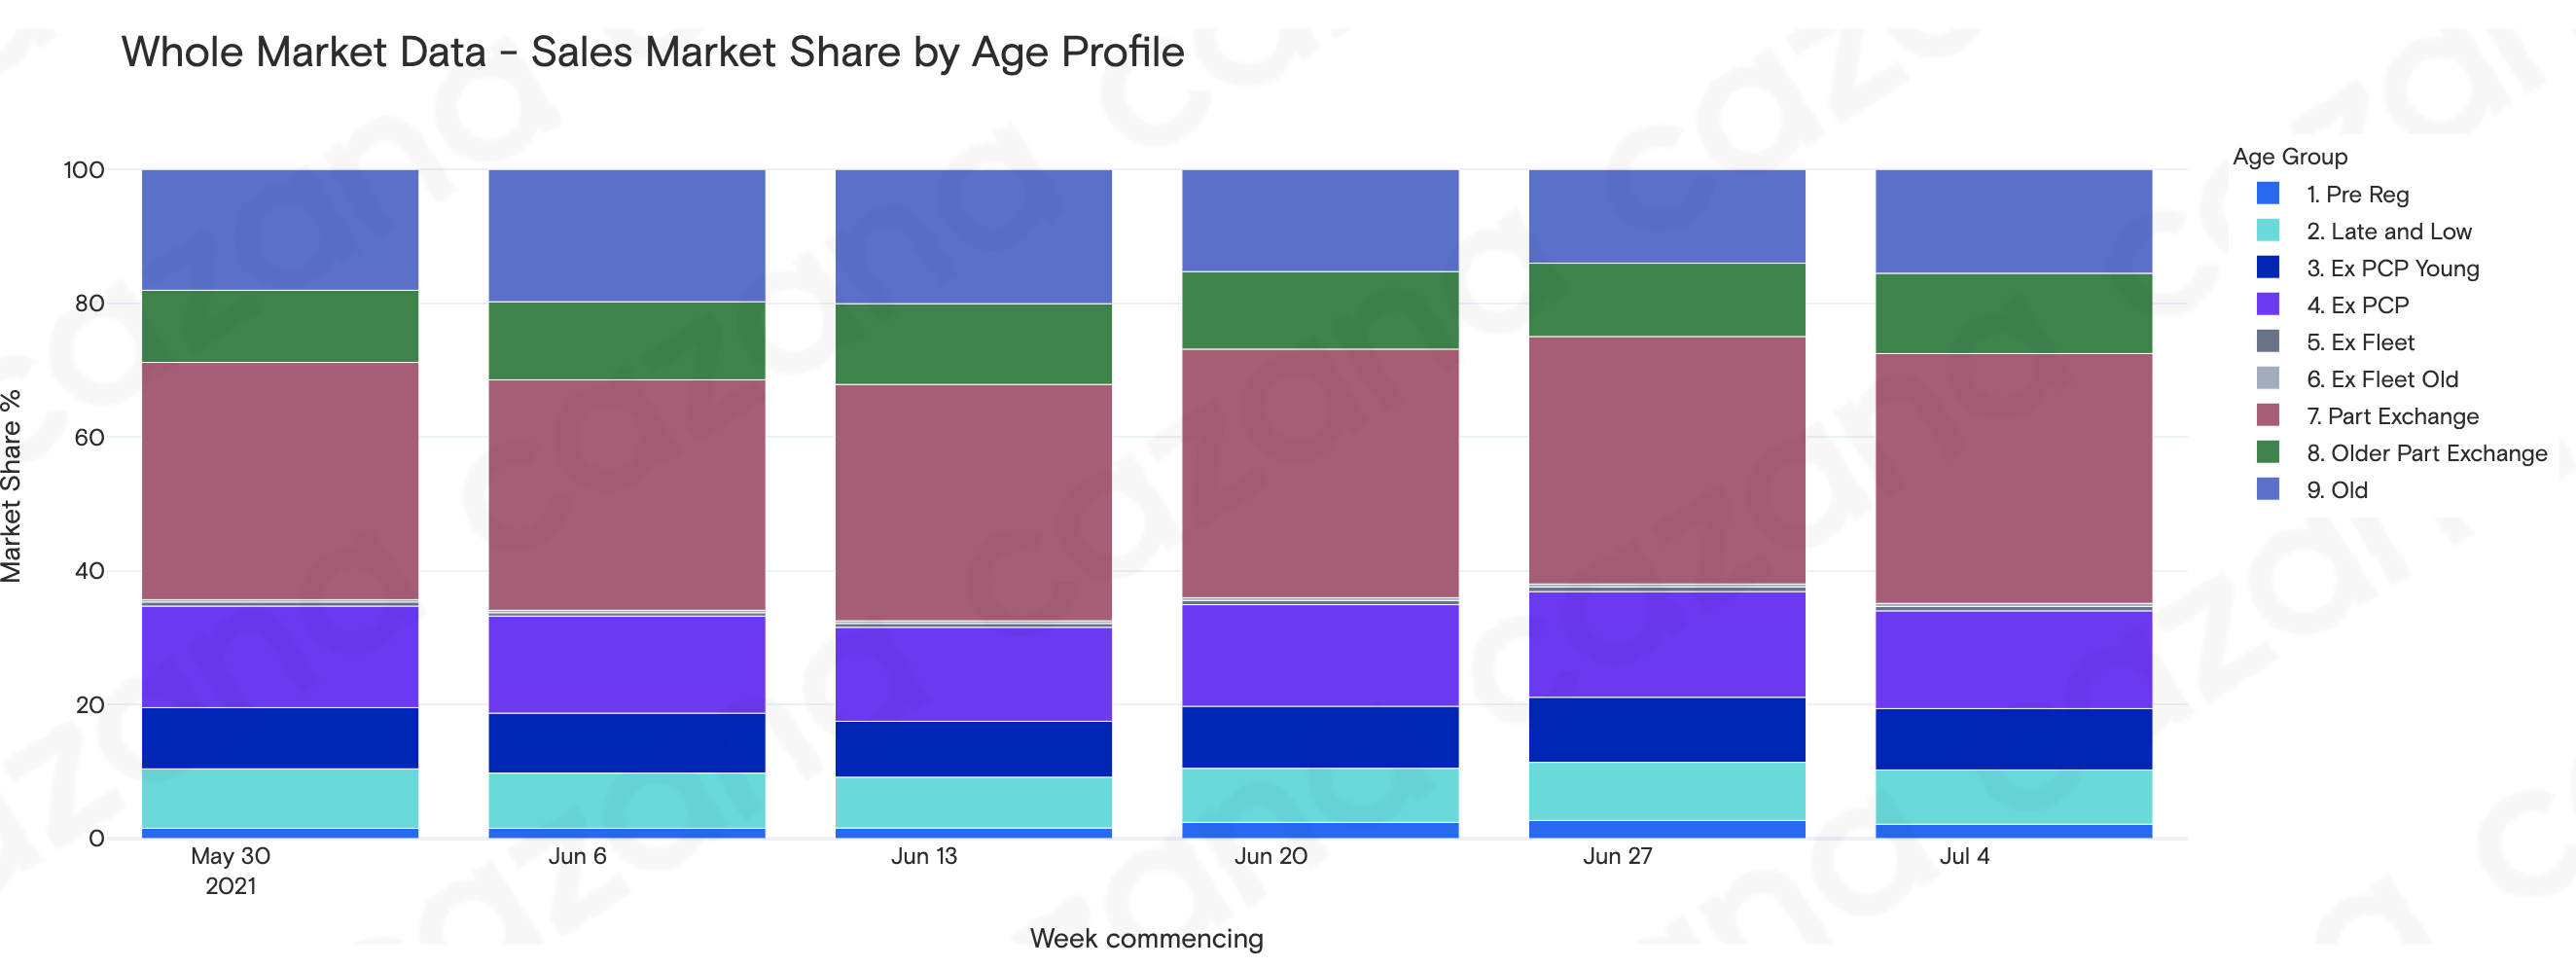 Weekly Pricing Insights - Sales Market Share by Age Profile - 13.07.21